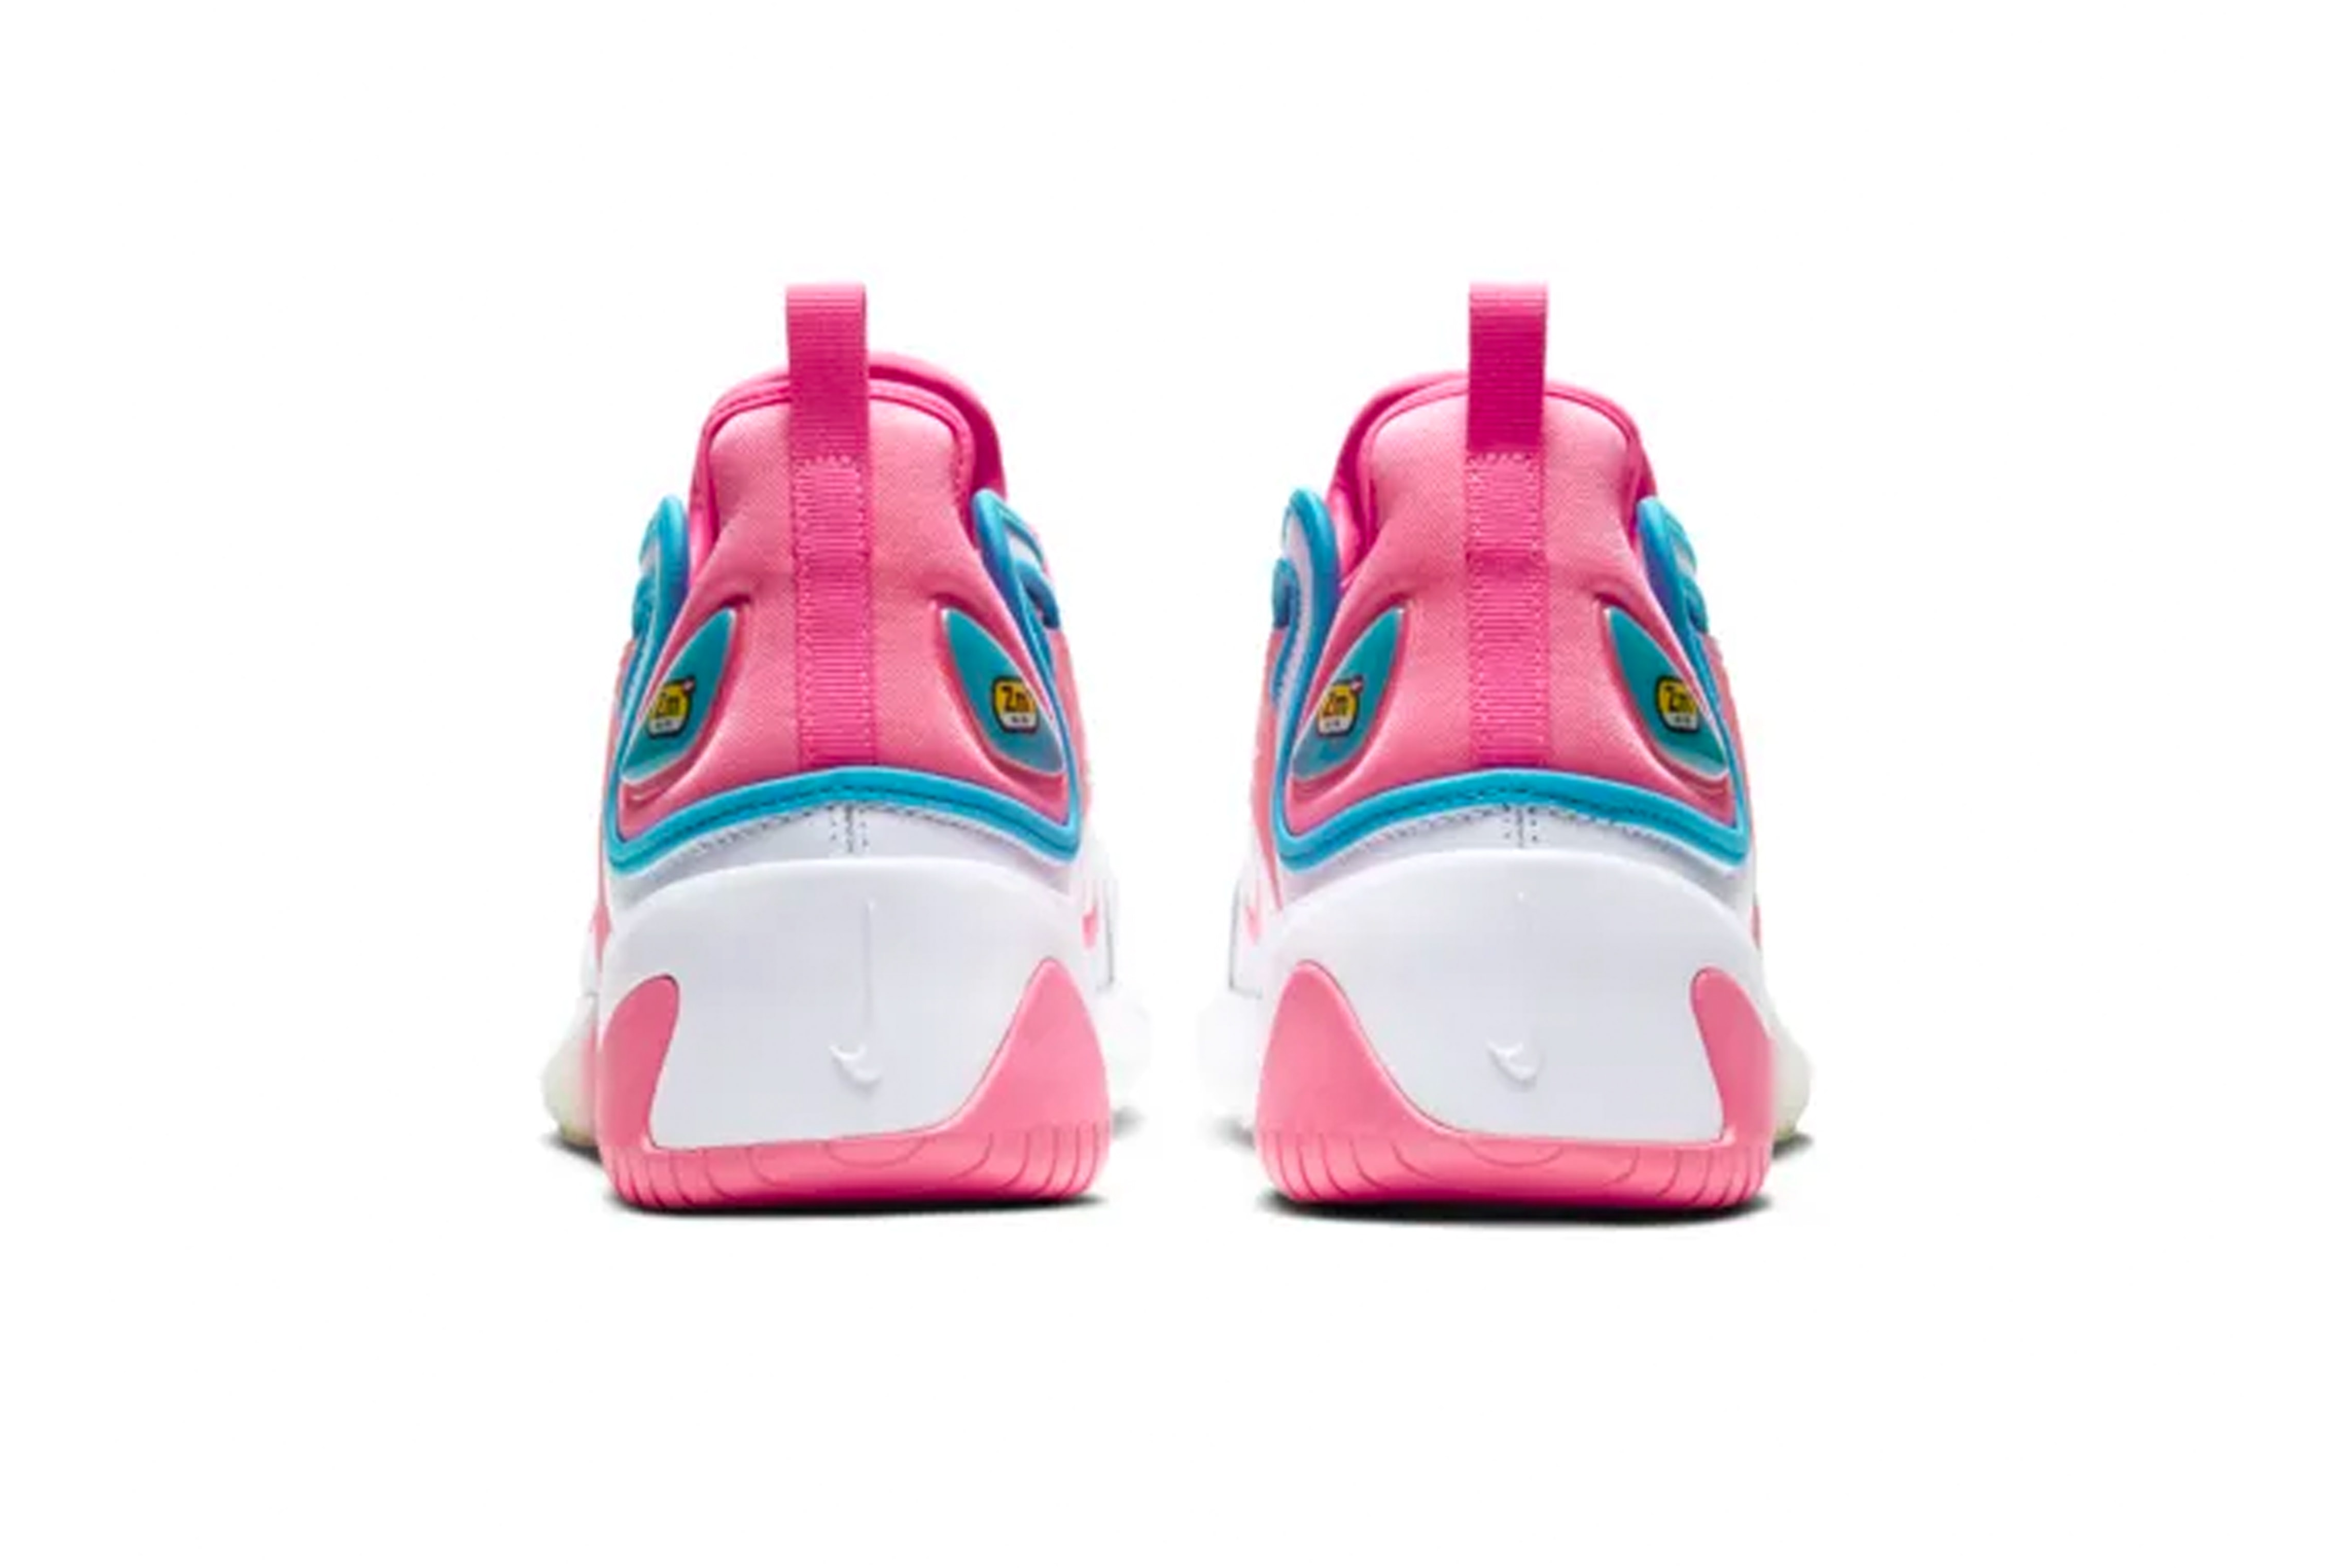 nike valentines day exclusive zoom 2k sneakers pink blue white womens love retro inspired vibrant air sole footwear